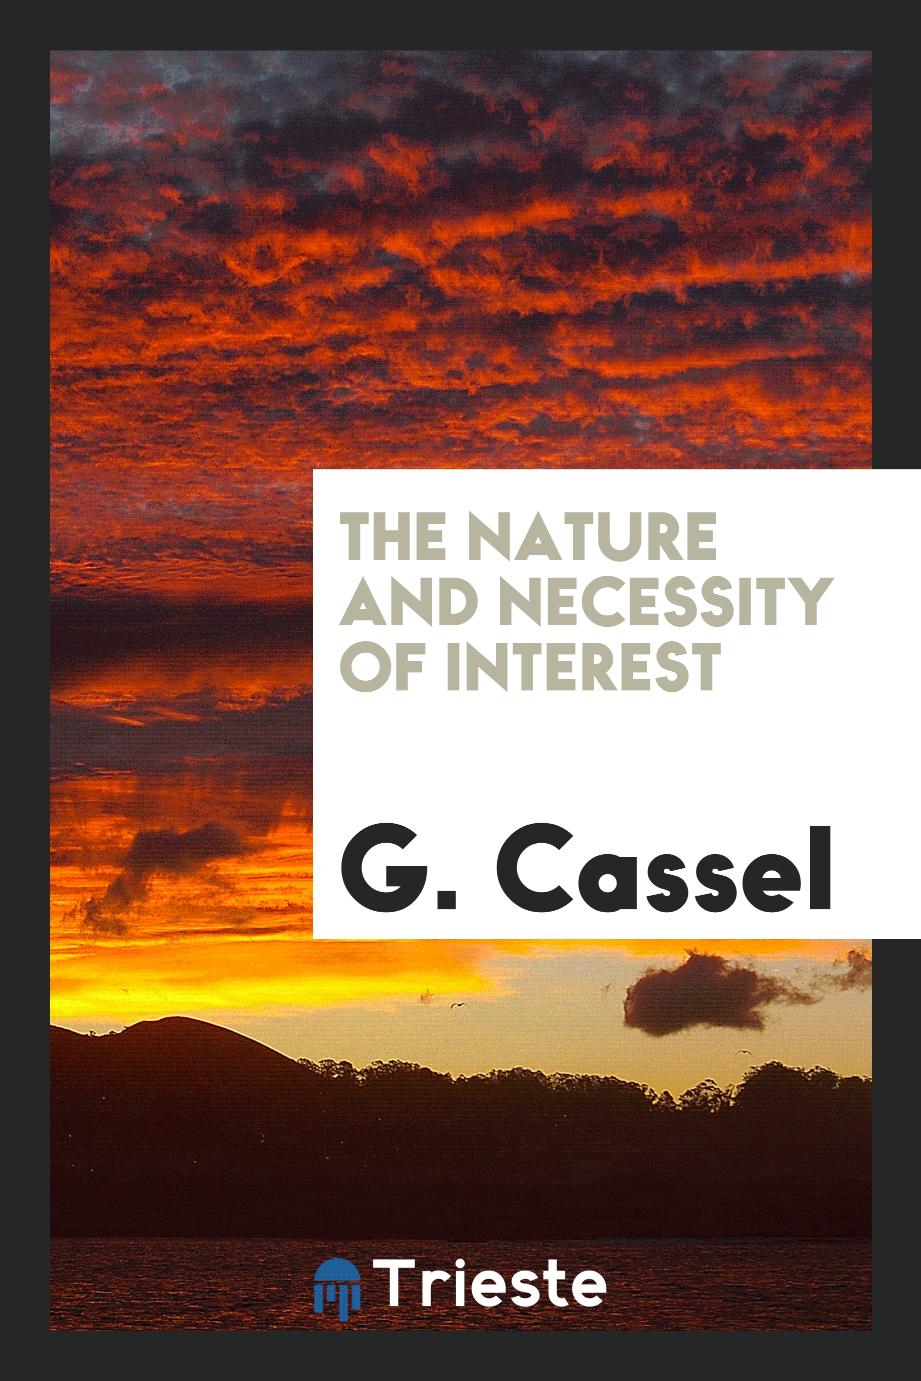 The nature and necessity of interest